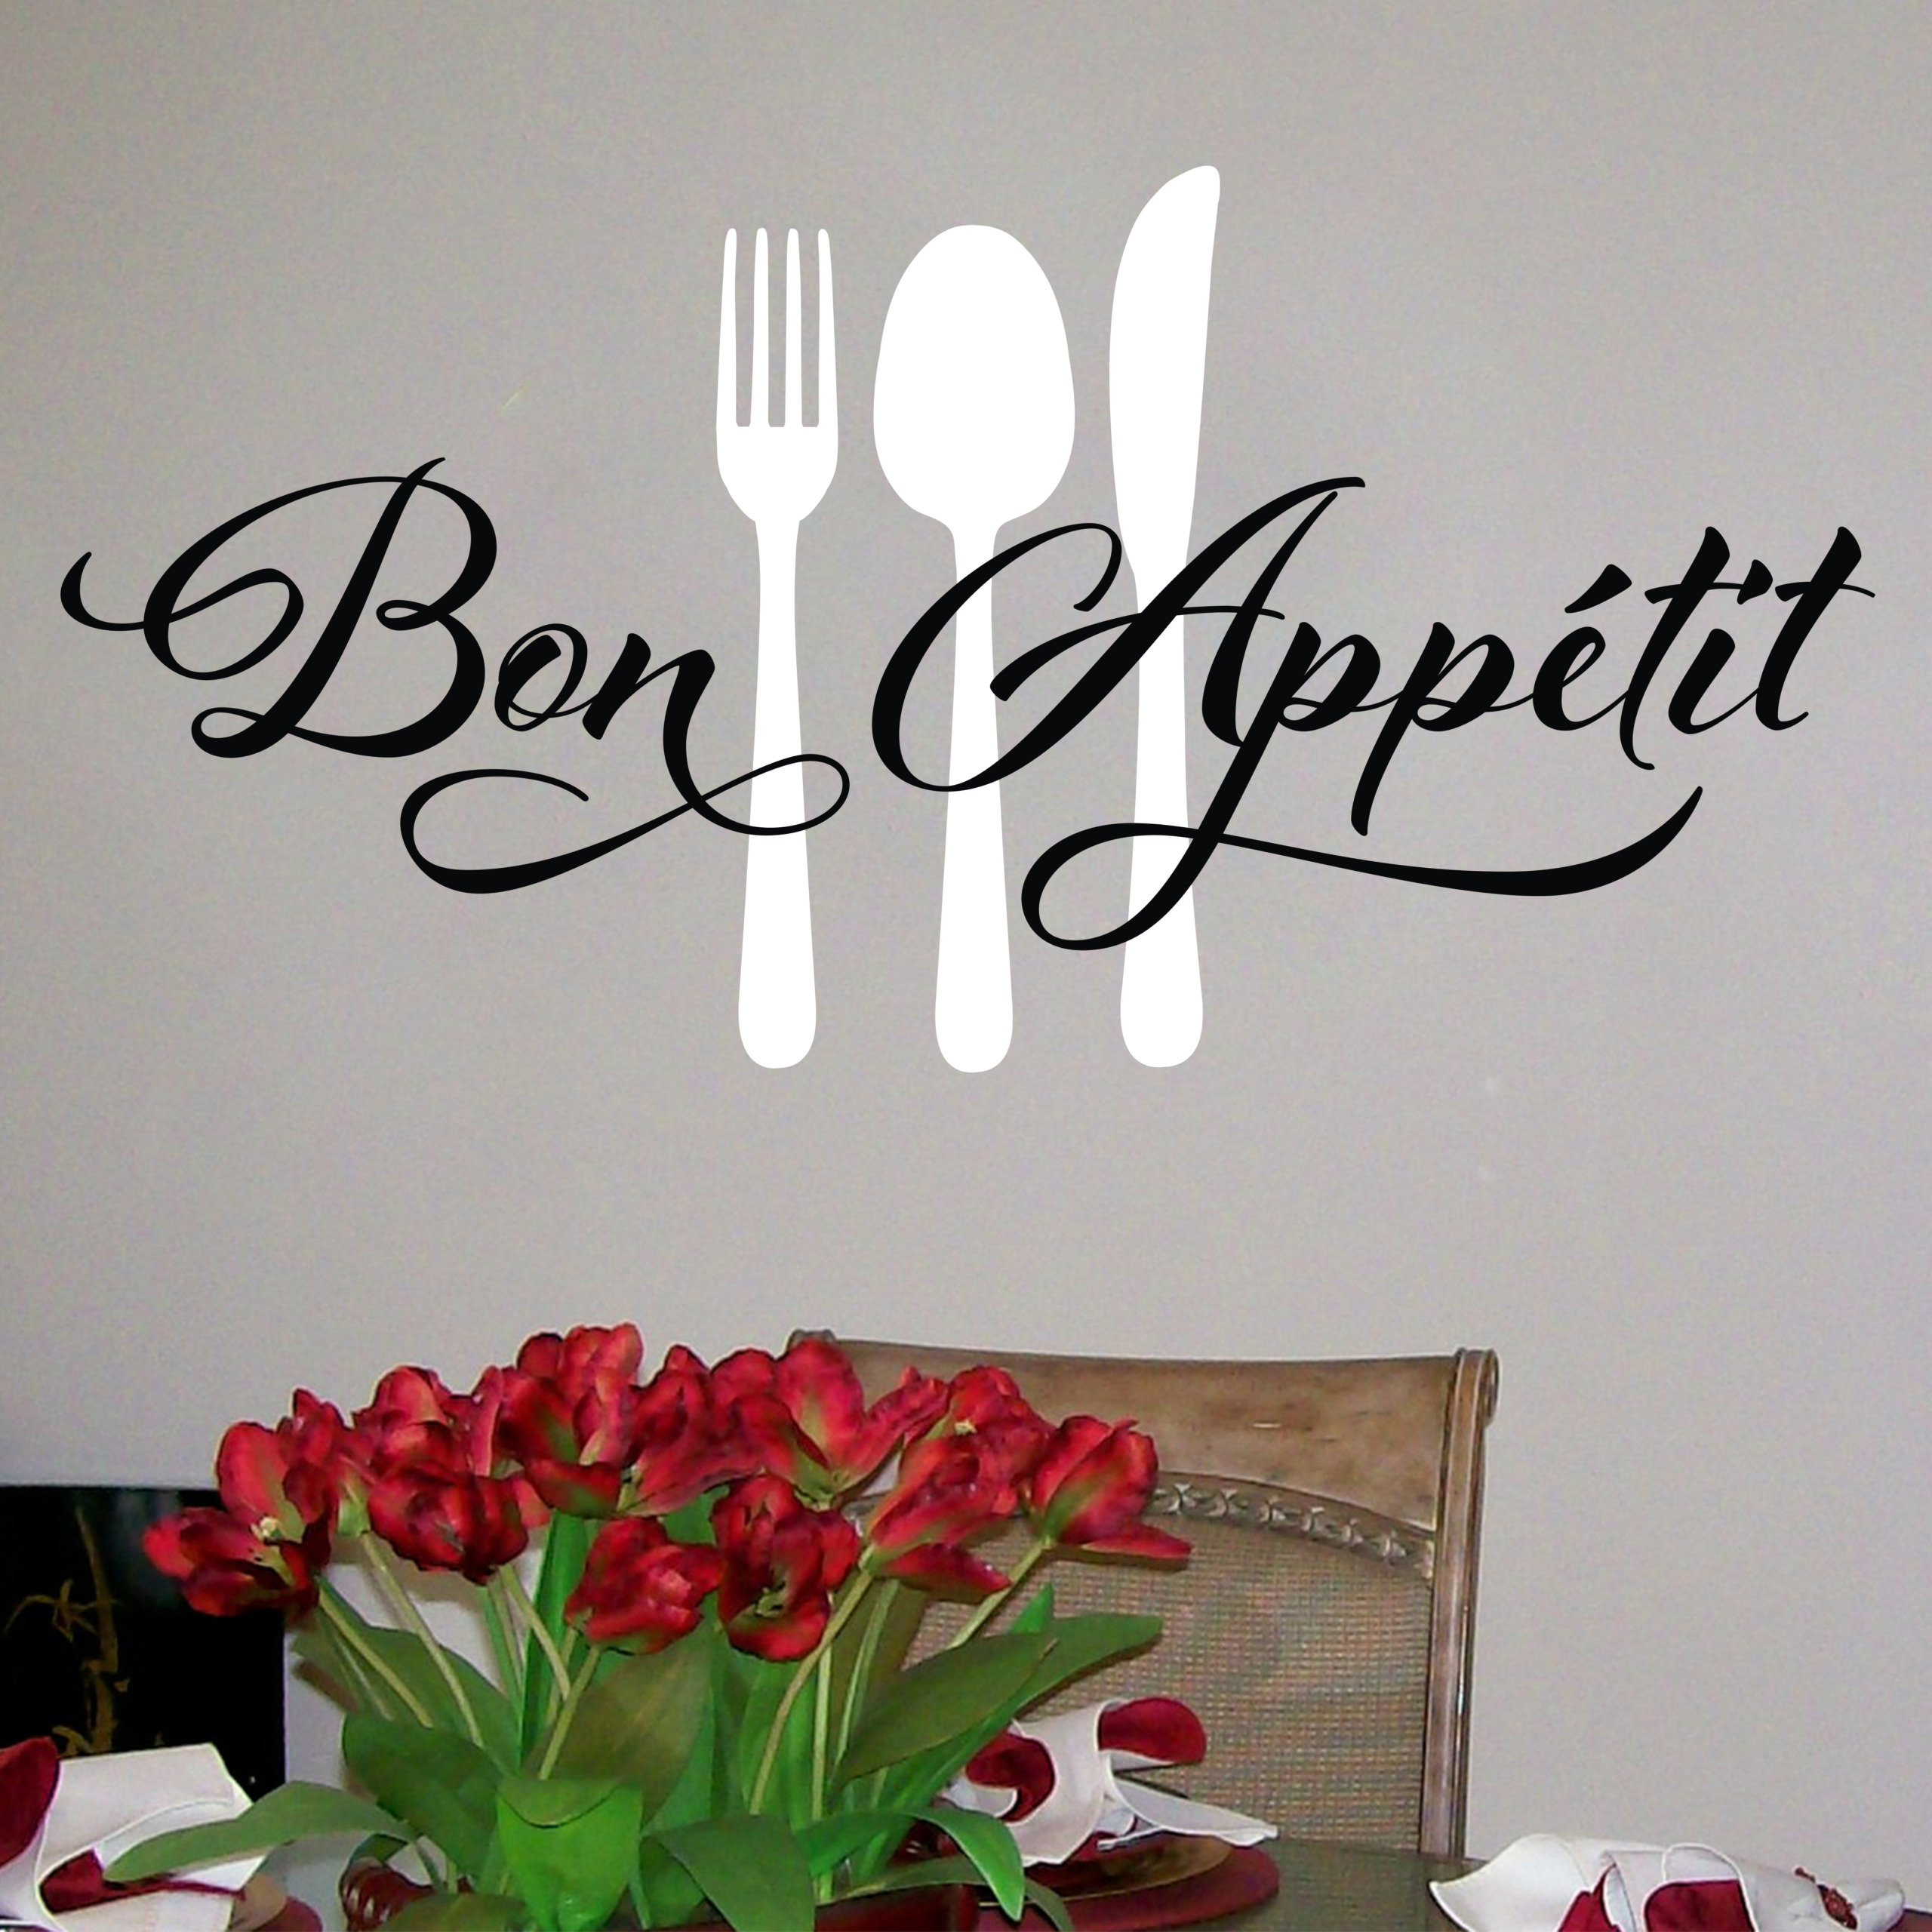 BON APPETIT Fork Spoon Knife Vinyl Wall Decal by Wild Eyes Signs, Kitchen  Dining Room, Pantry Vinyl Lettering, Kitchen Decor, Pantry Door Decal